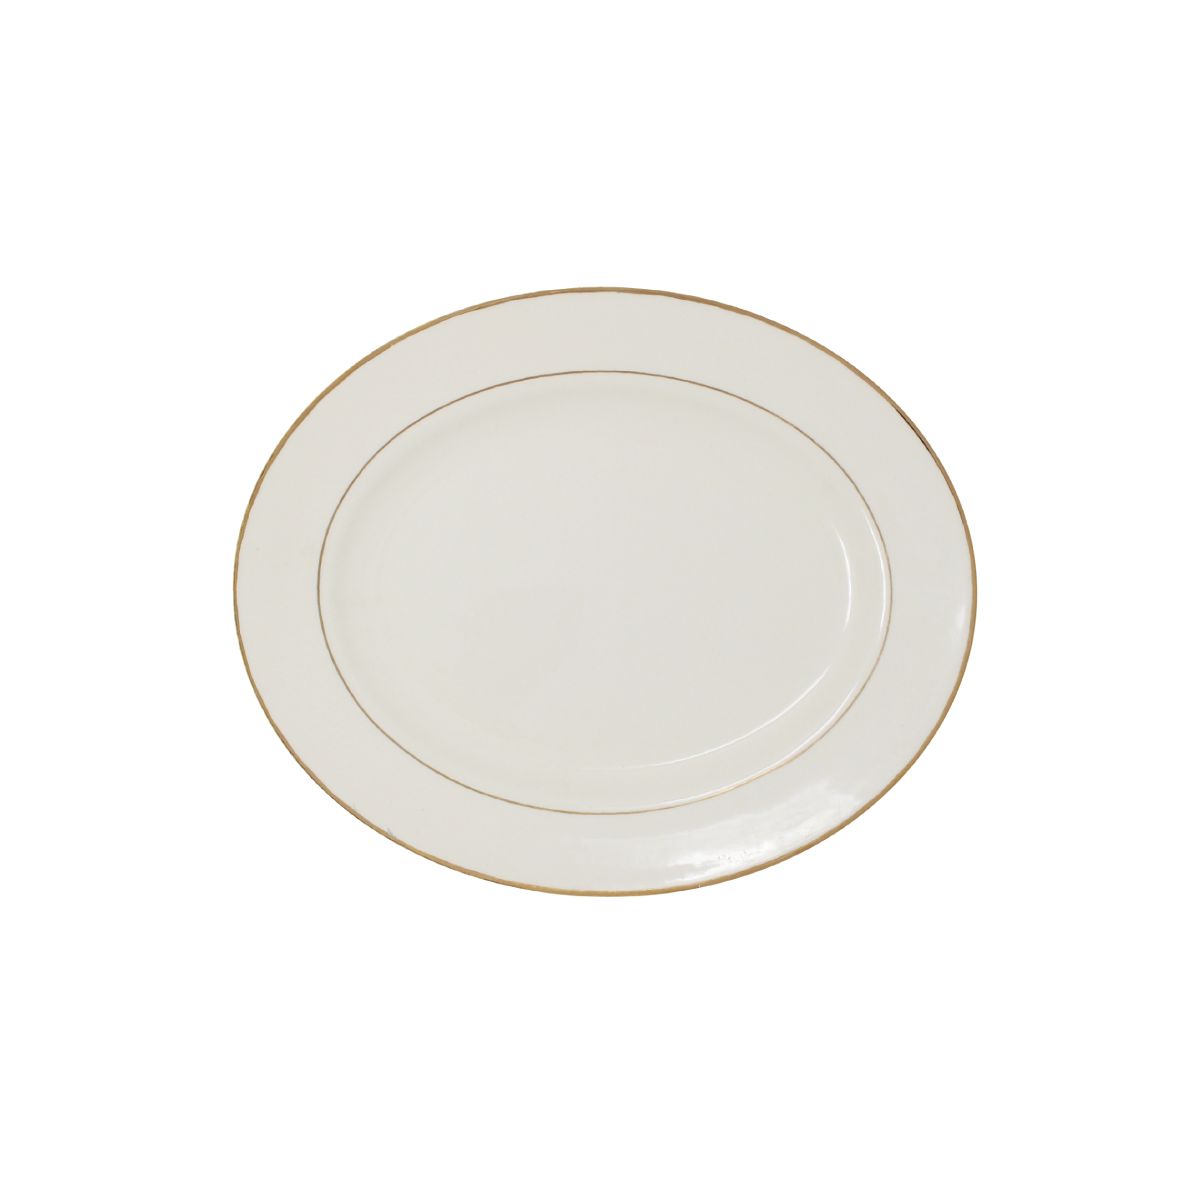 Platter Beige With Gold Band 9